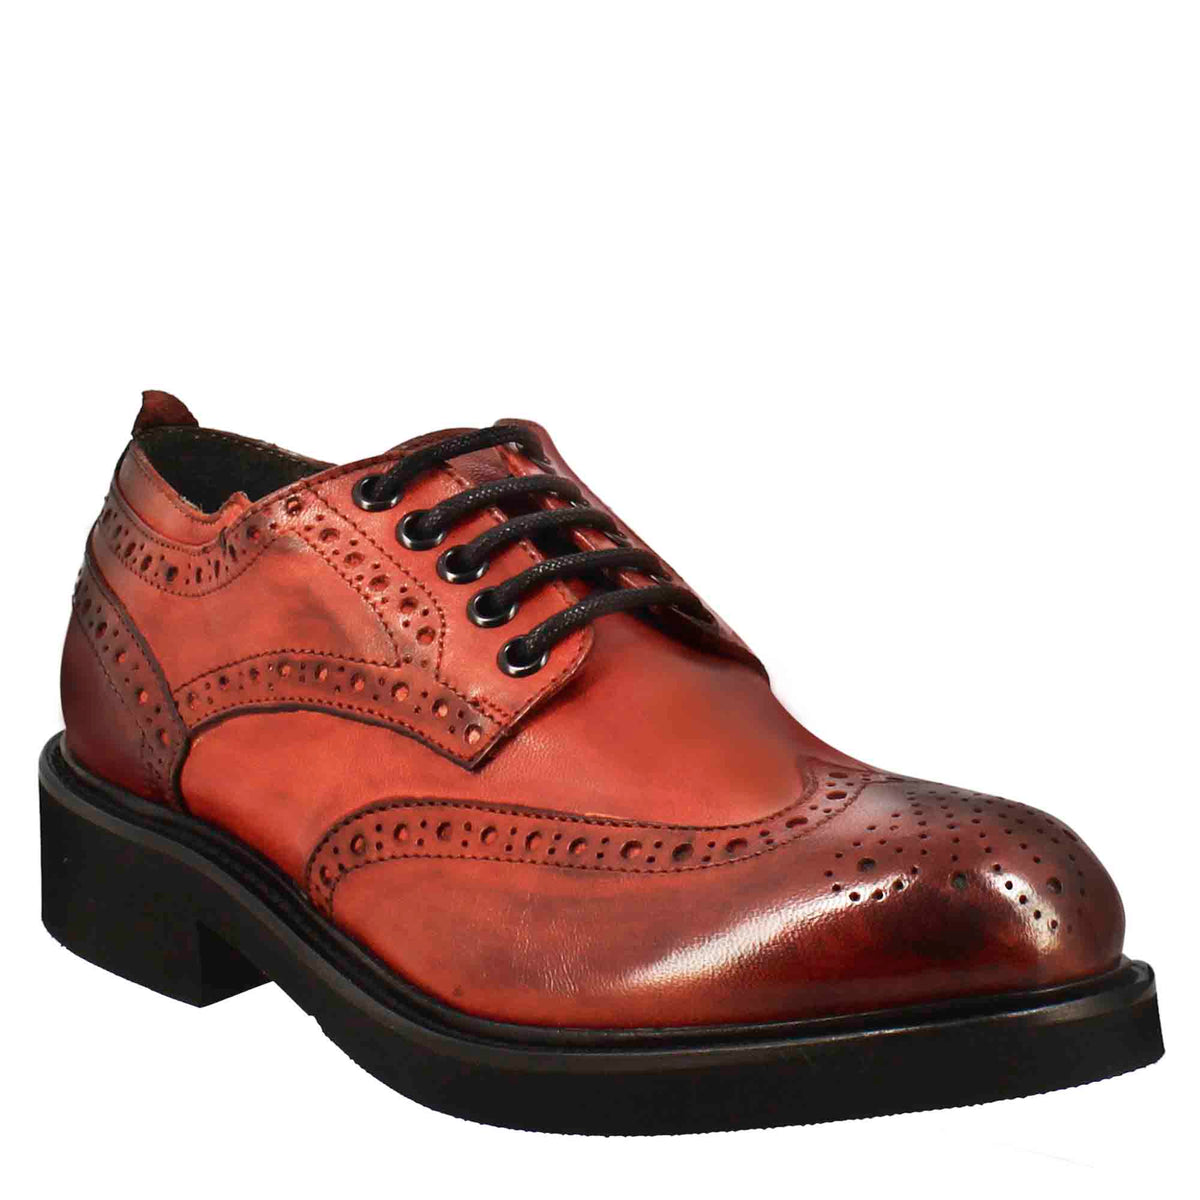 Women's derby with paupa brogue details in red washed leather